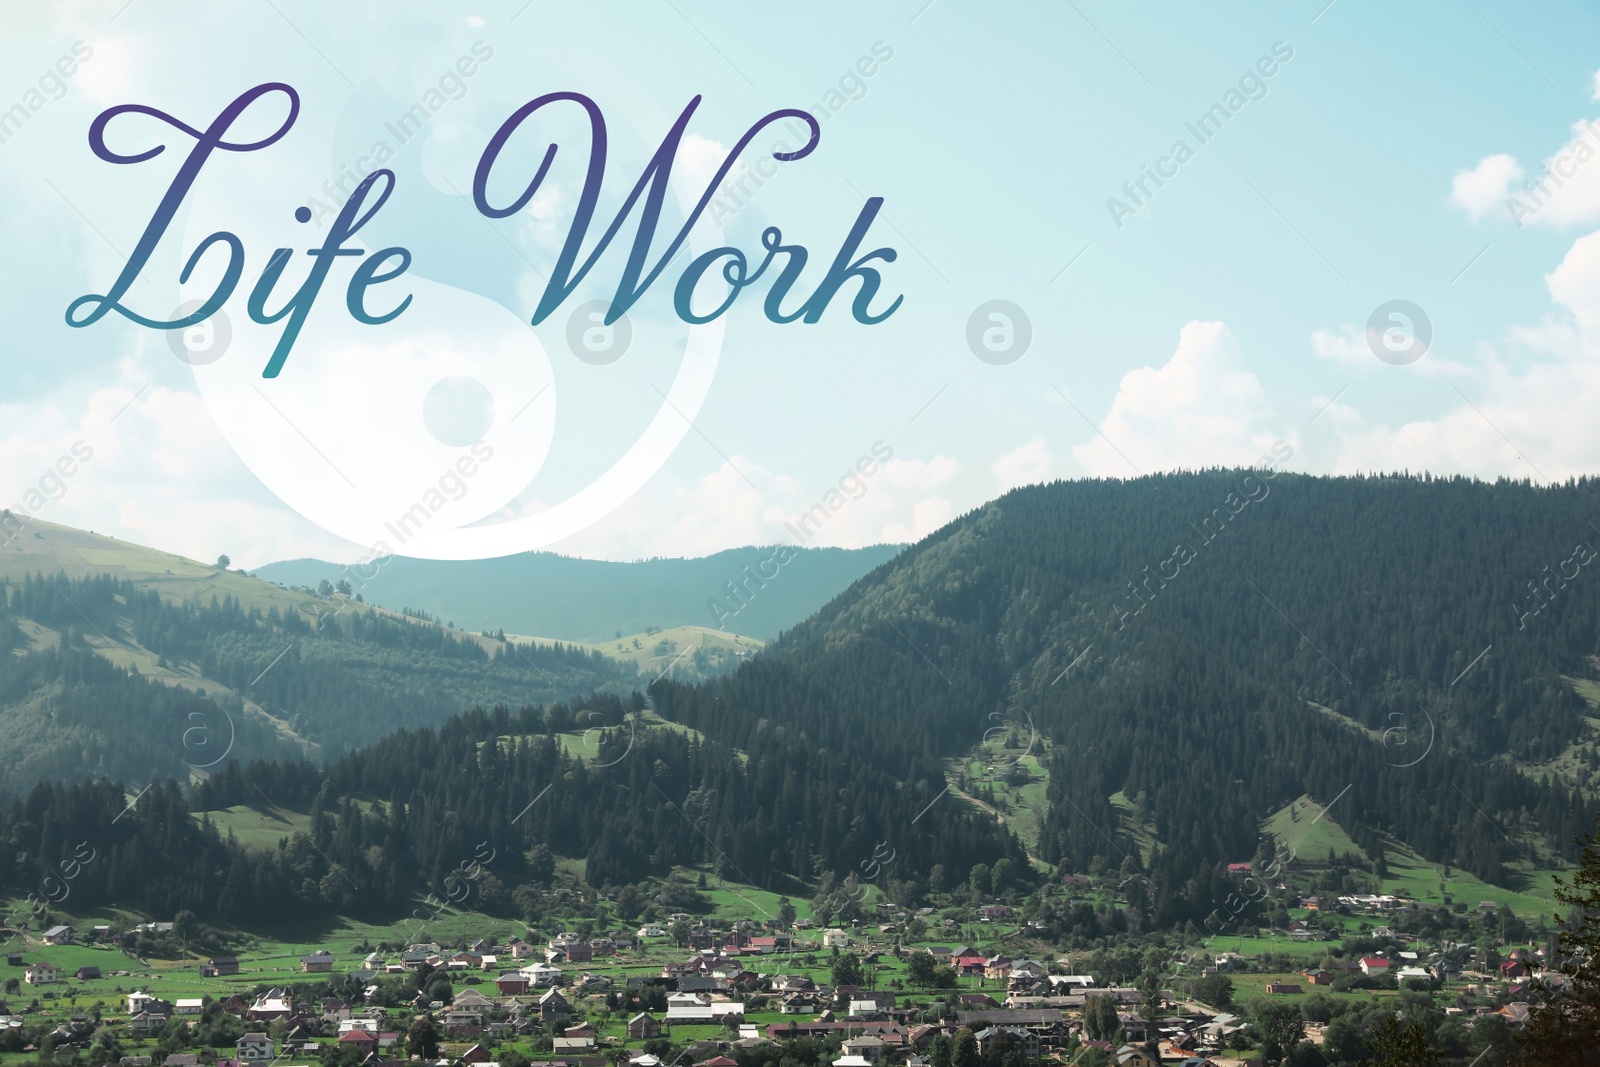 Image of Picturesque forest landscape with village in mountains. Concept of balance between work and life